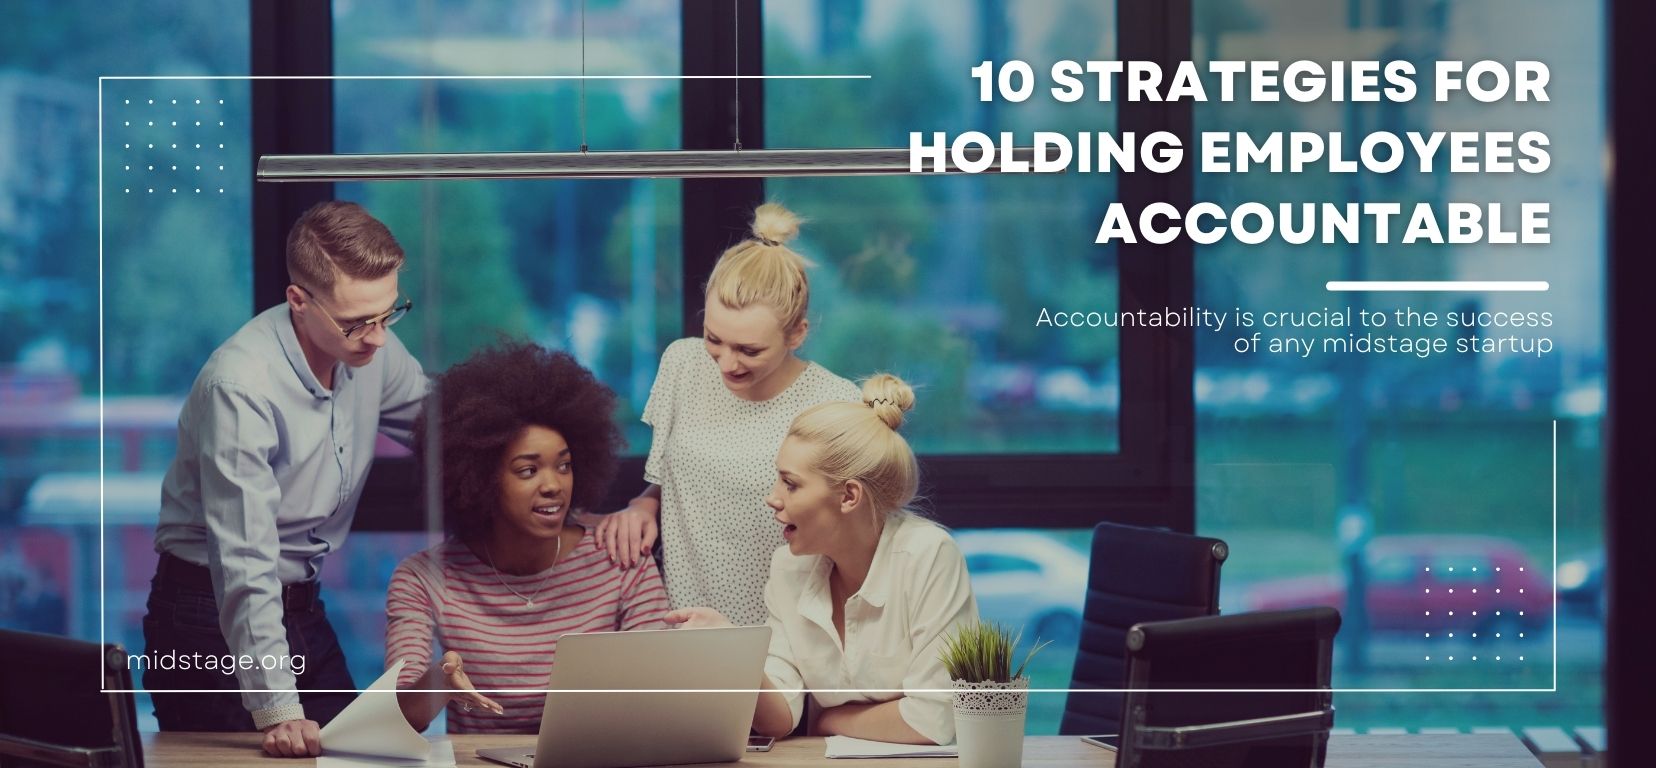 10 Strategies for Holding Employees Accountable Accountability is crucial to the success of any midstage startup